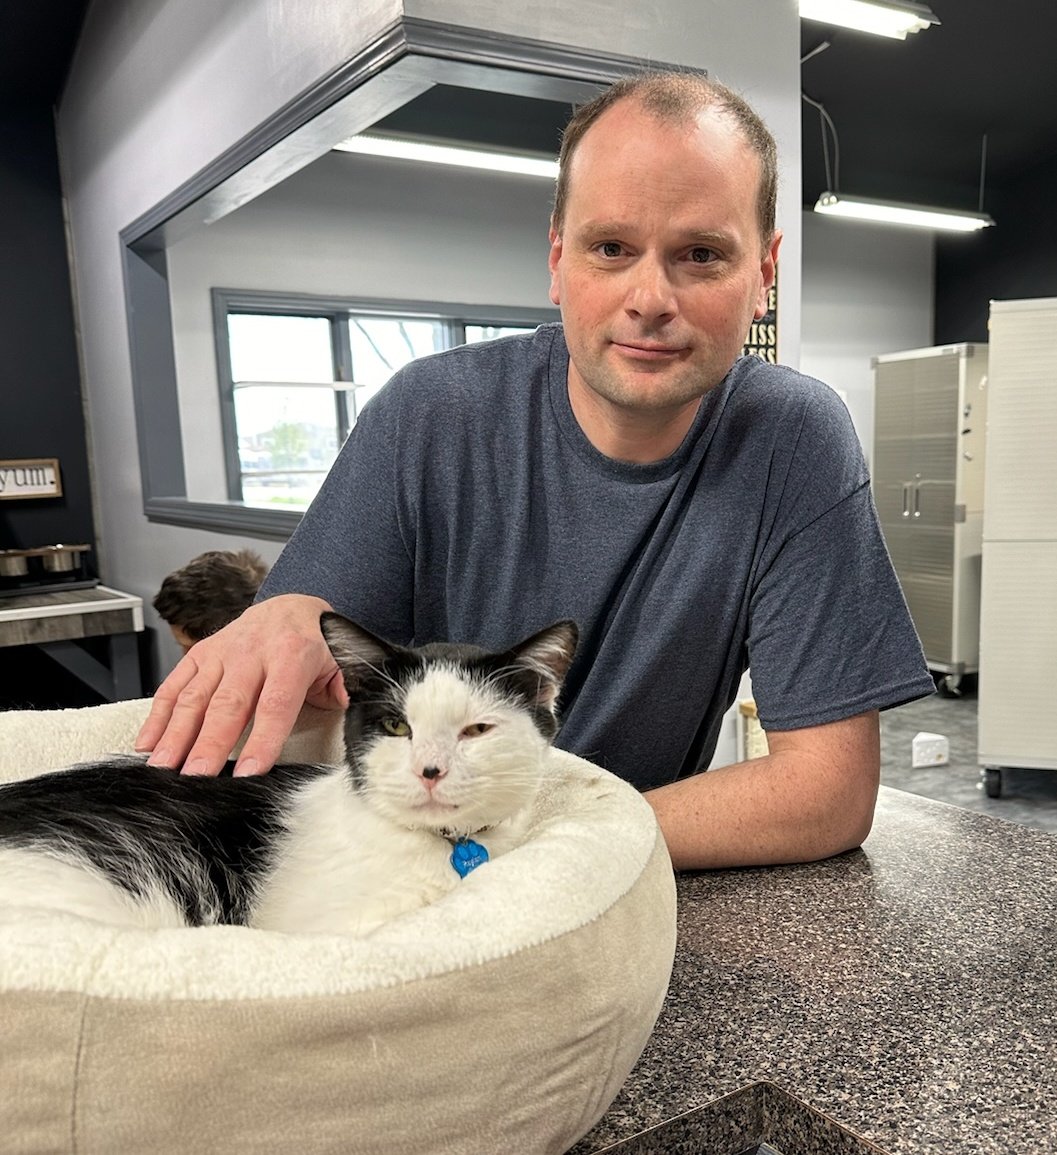 After being with us for almost one year, Raylan found his perfect match! 🎉 We're so happy for him and his new cat dad! Happy tails, Raylan!